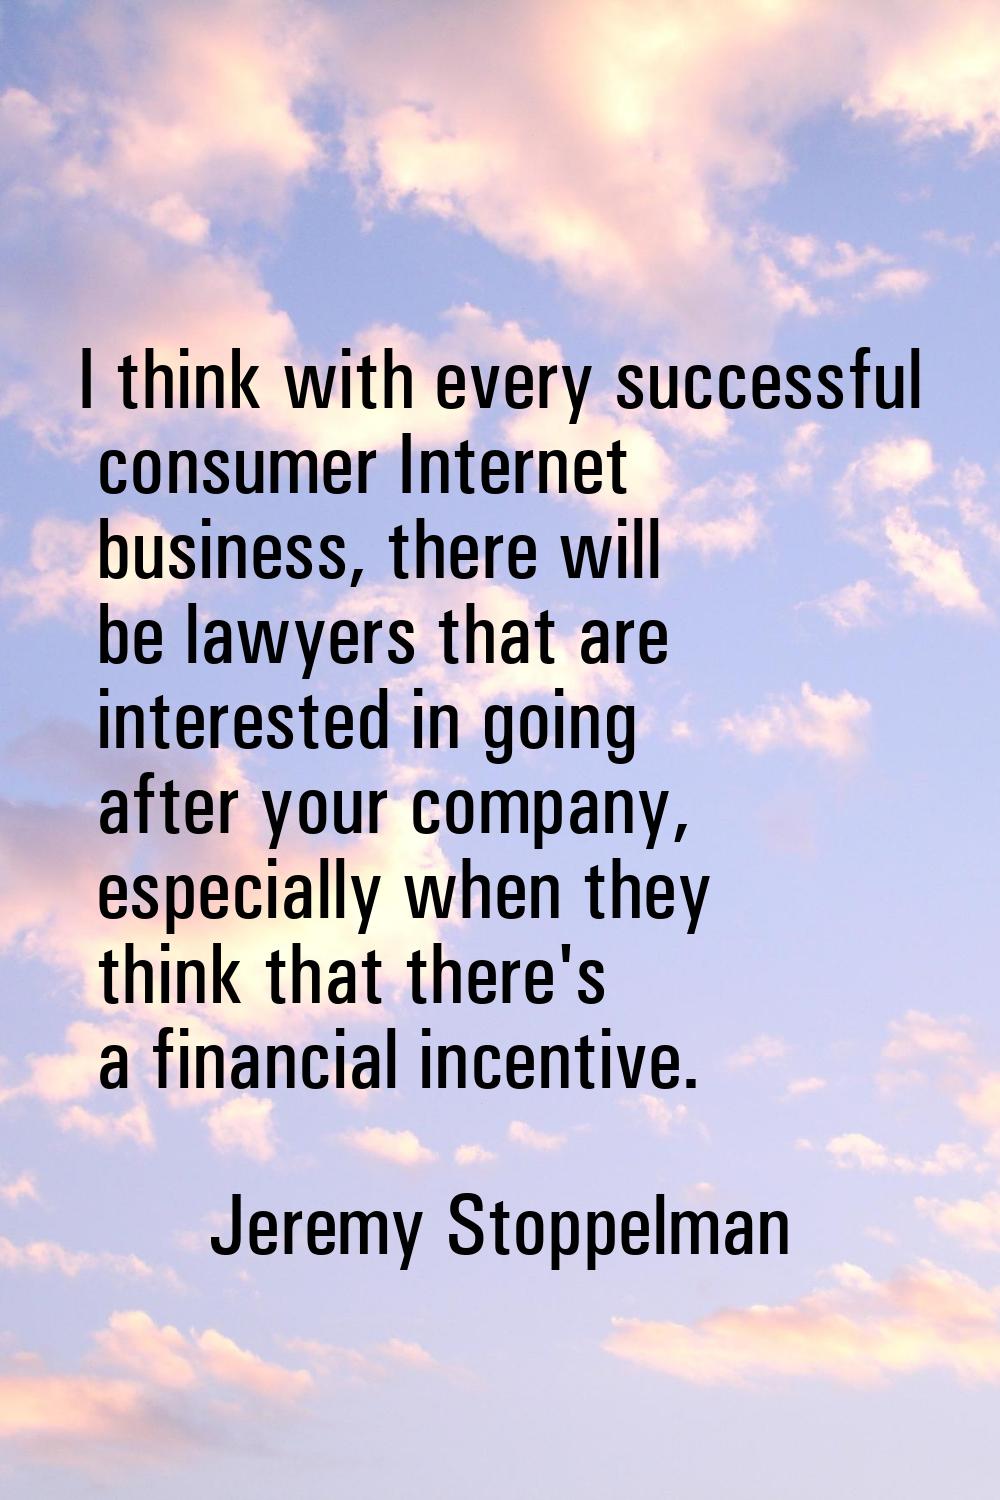 I think with every successful consumer Internet business, there will be lawyers that are interested